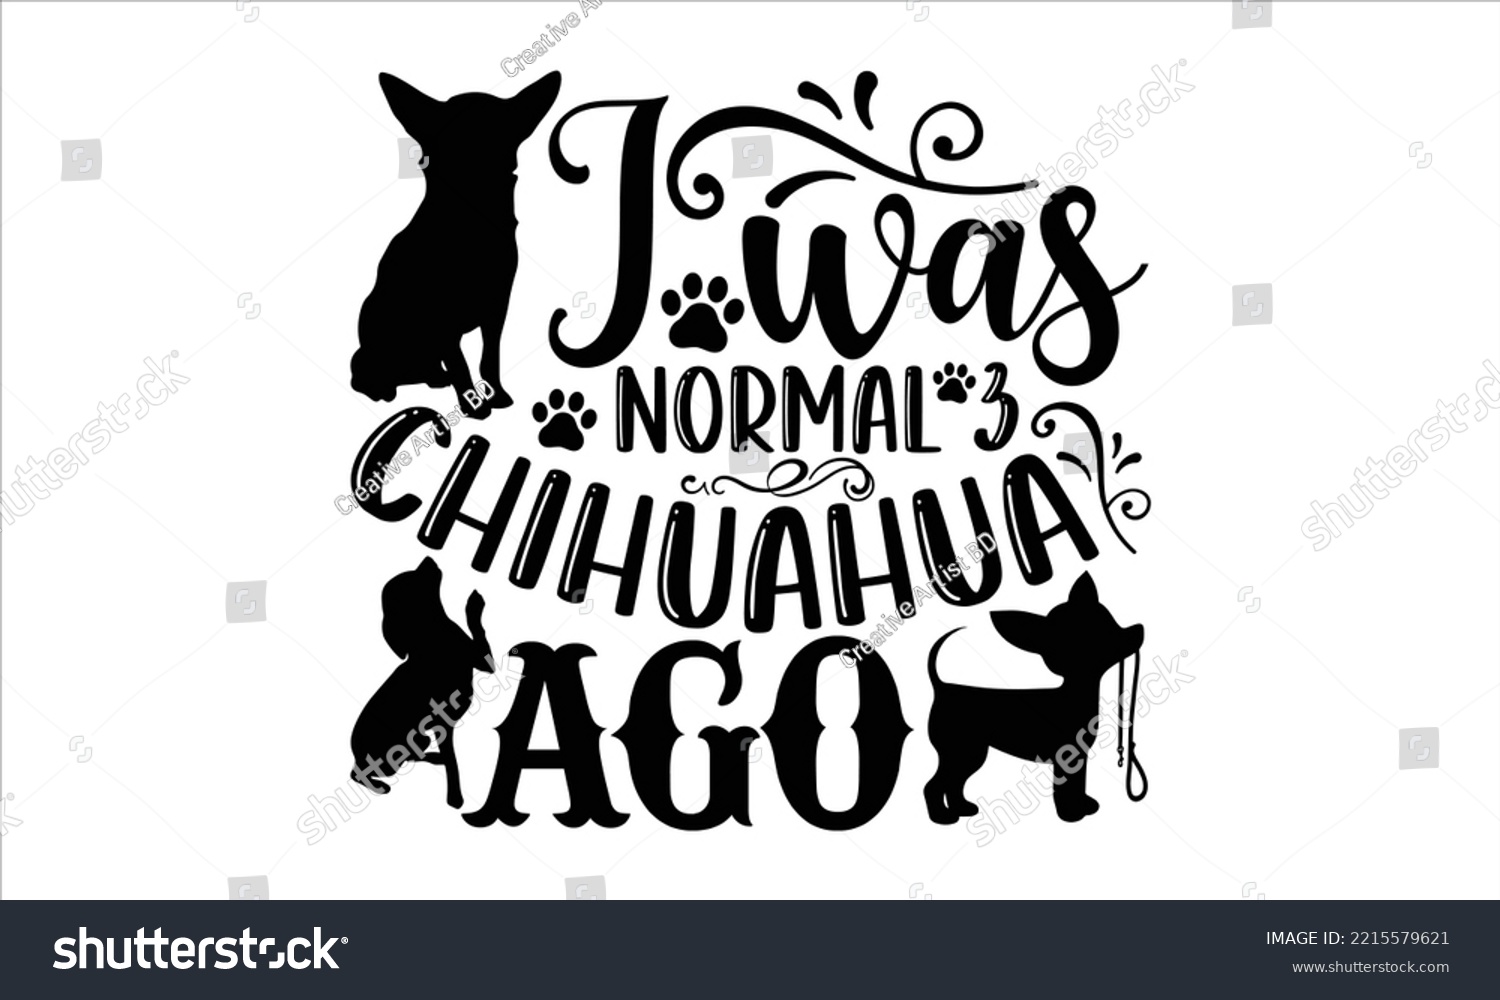 SVG of I Was Normal 3 Chihuahua Ago - Chihuahua T shirt Design, Modern calligraphy, Cut Files for Cricut Svg, Illustration for prints on bags, posters svg